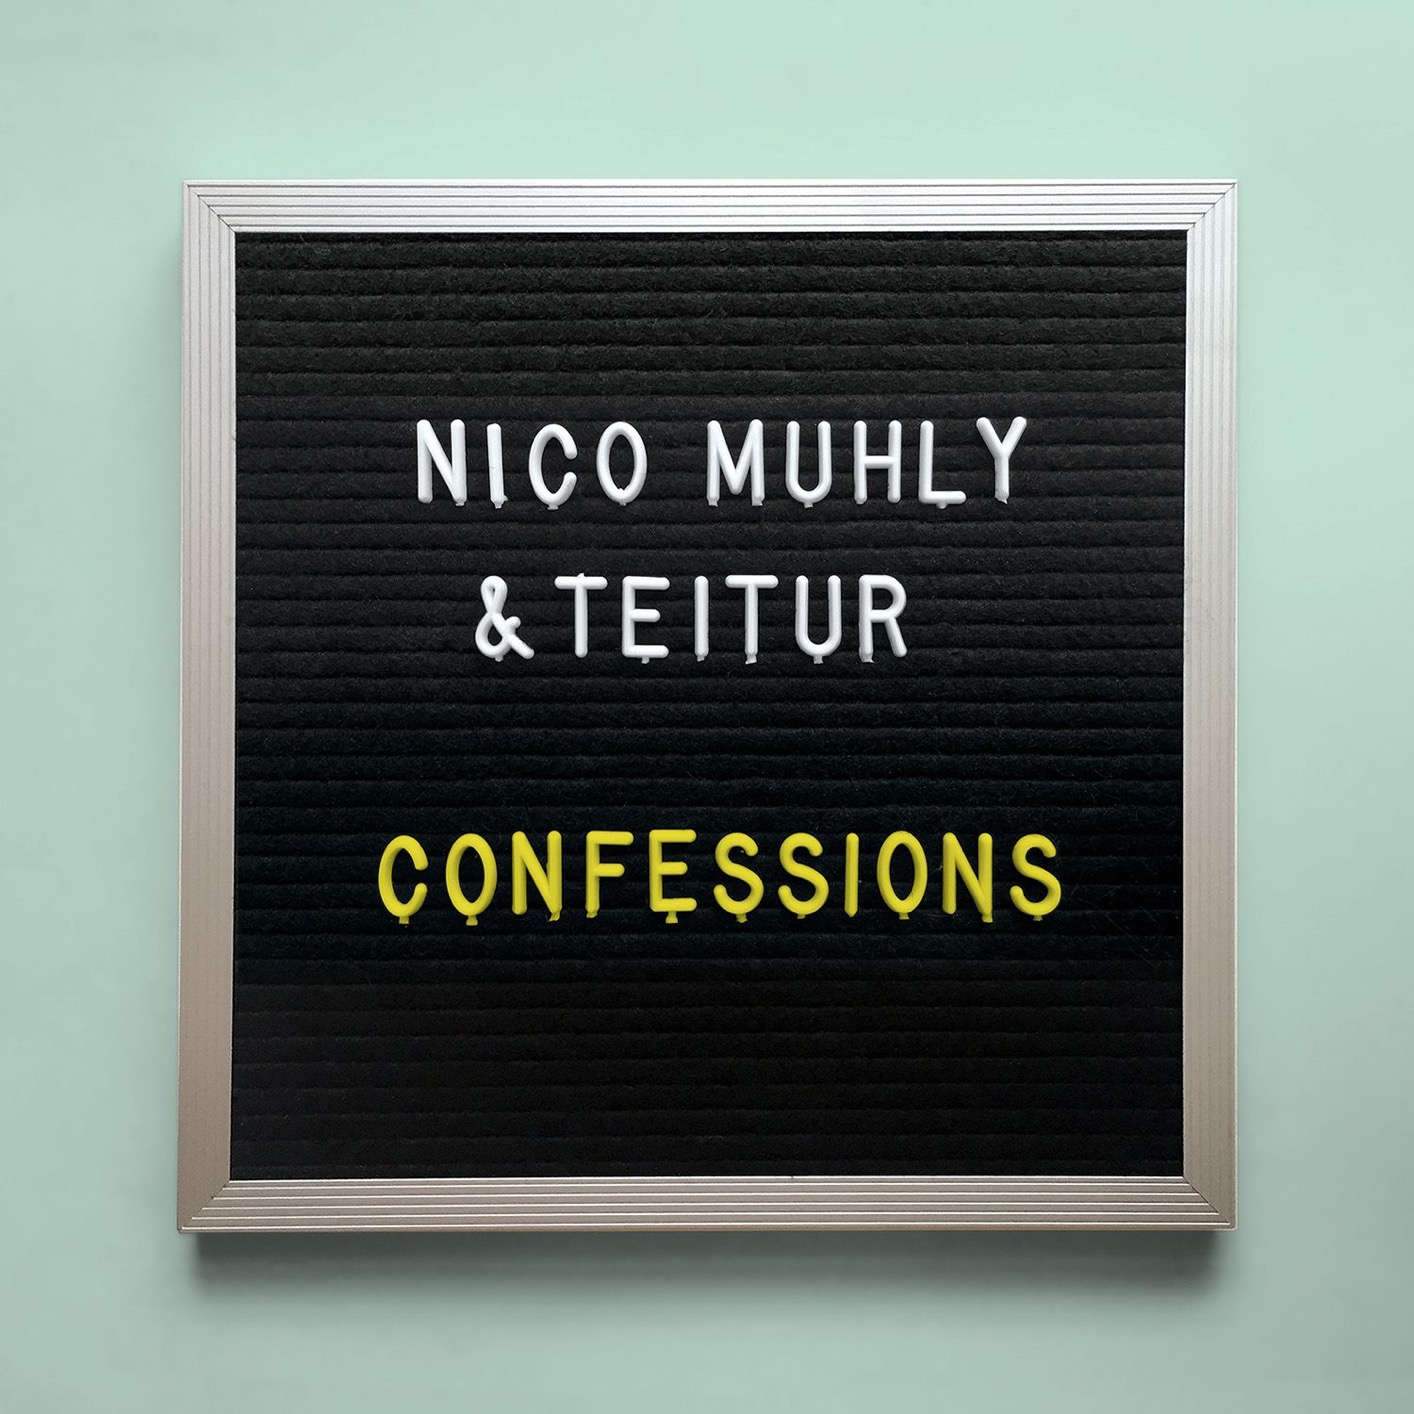 Nico Muhly & Teitur – Confessions (2016) [FLAC 24bit/44,1kHz]